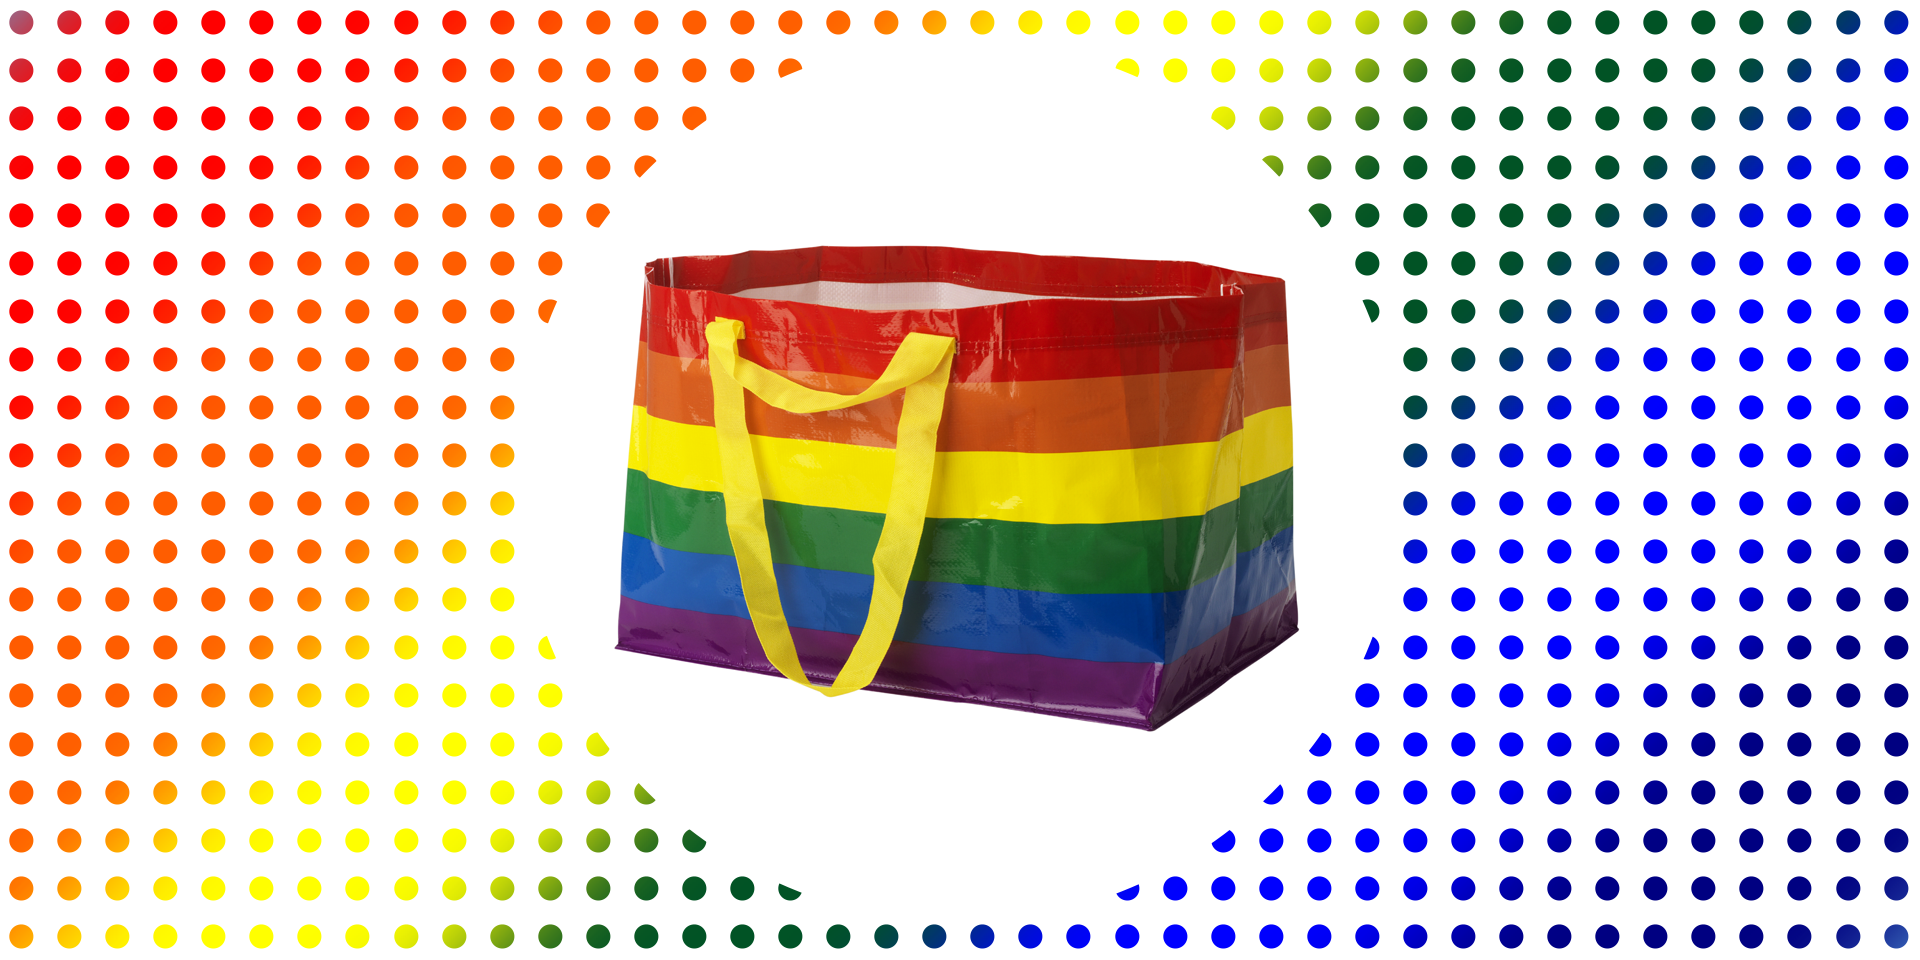 Details about   IKEA KVANTING Rainbow Pride Striped Reusable Bag LMTD EDITION Buy More & Save 